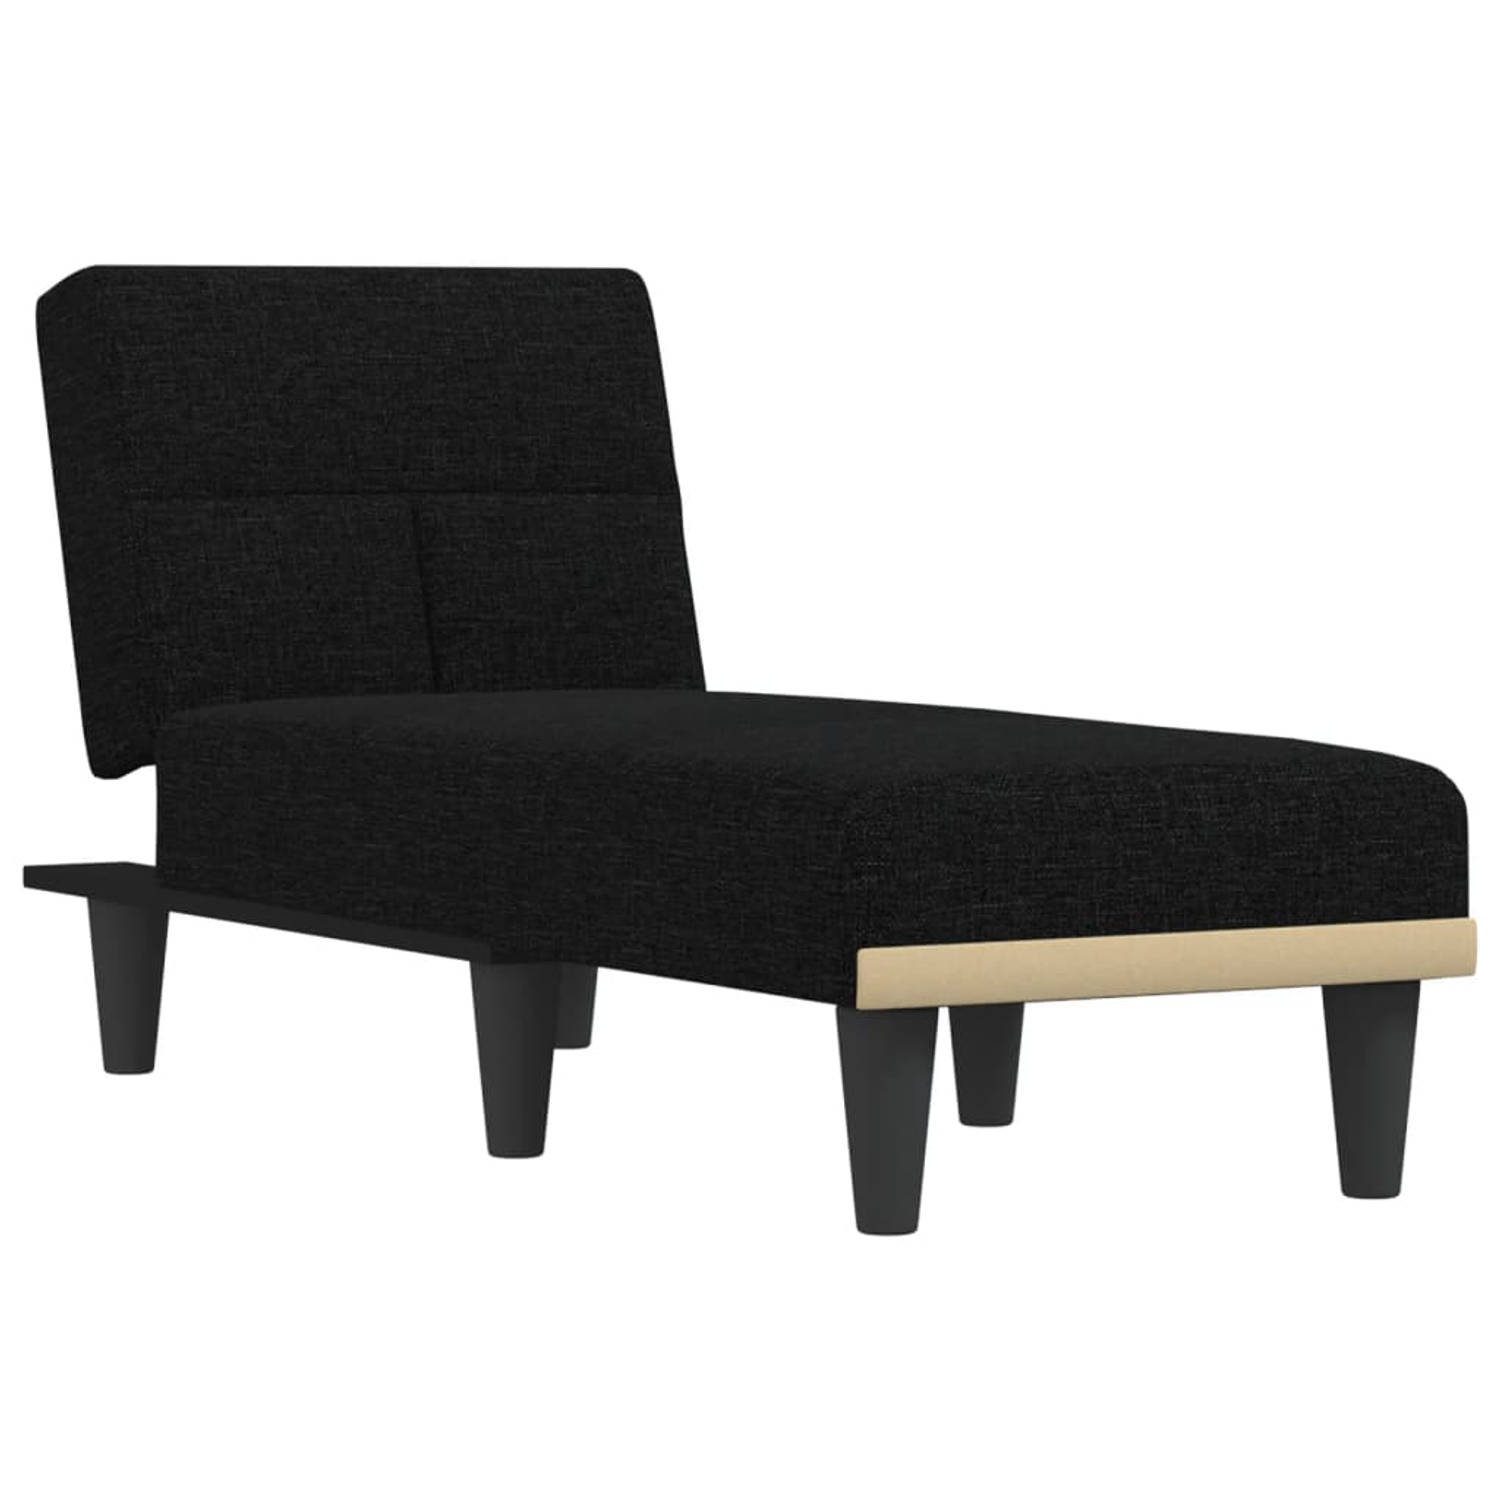 The Living Store Chaise longue stof zwart - Chaise longue